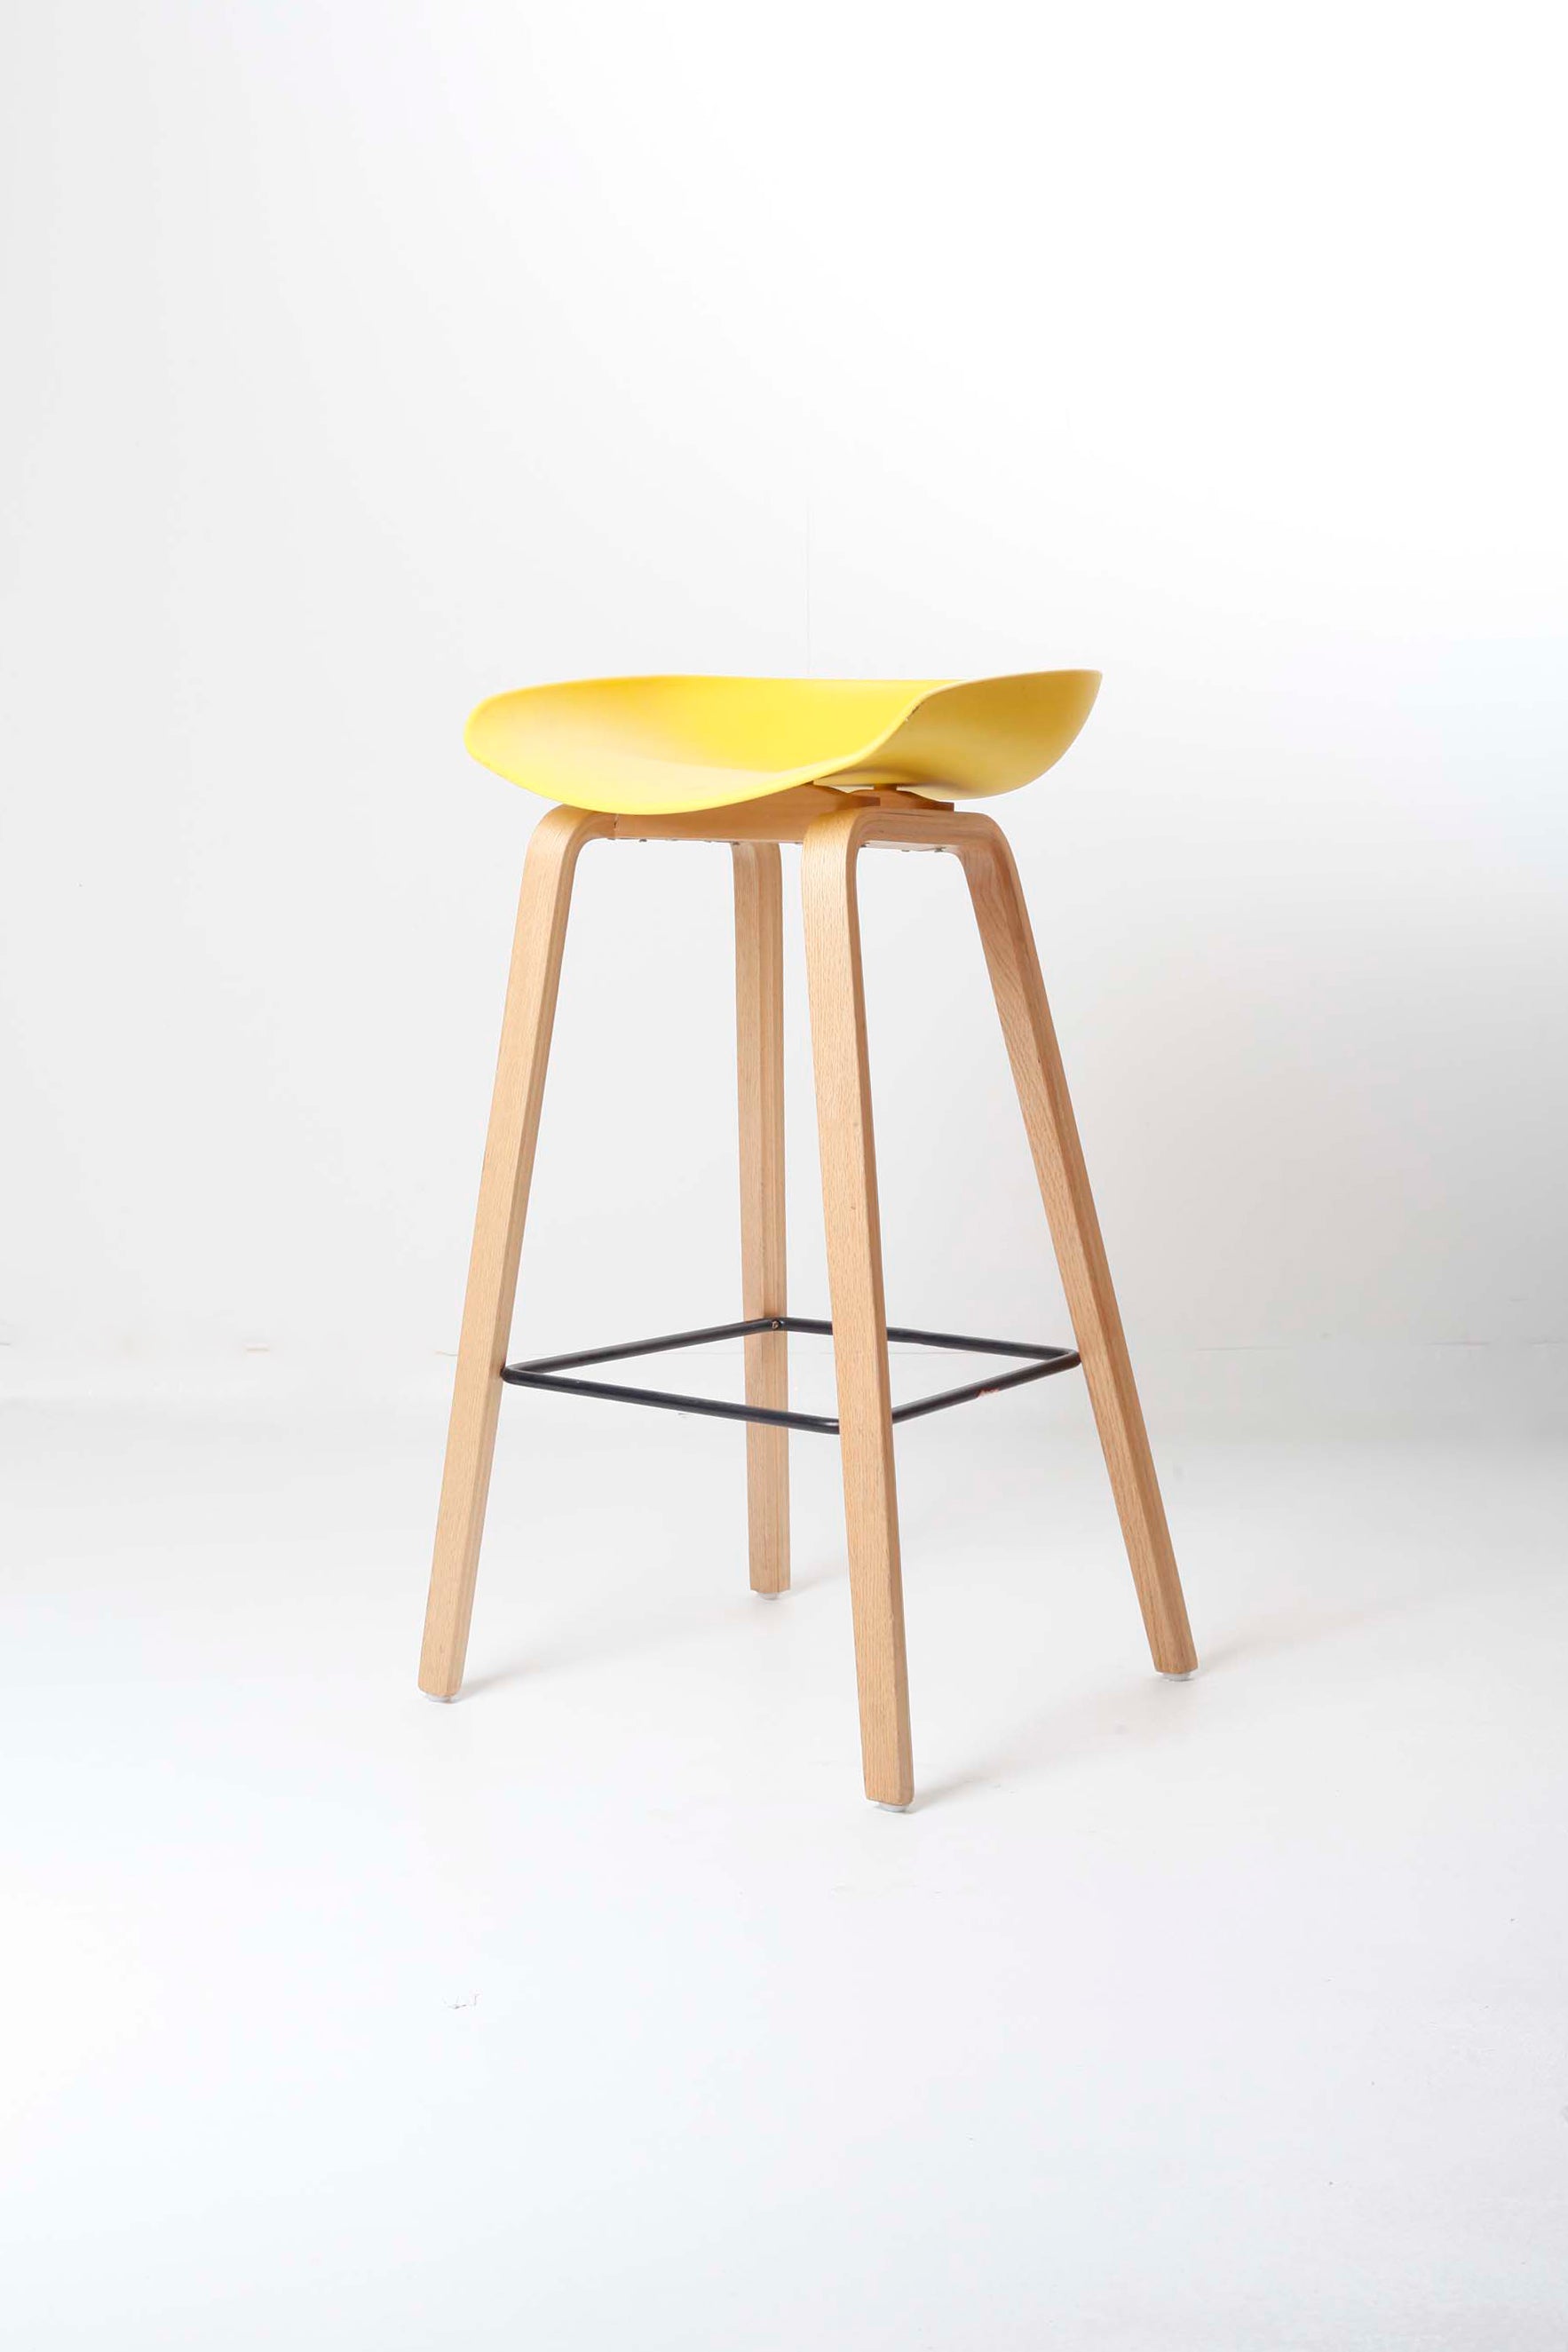 WOODEN BAR STOOL WITH YELLOW SEAT